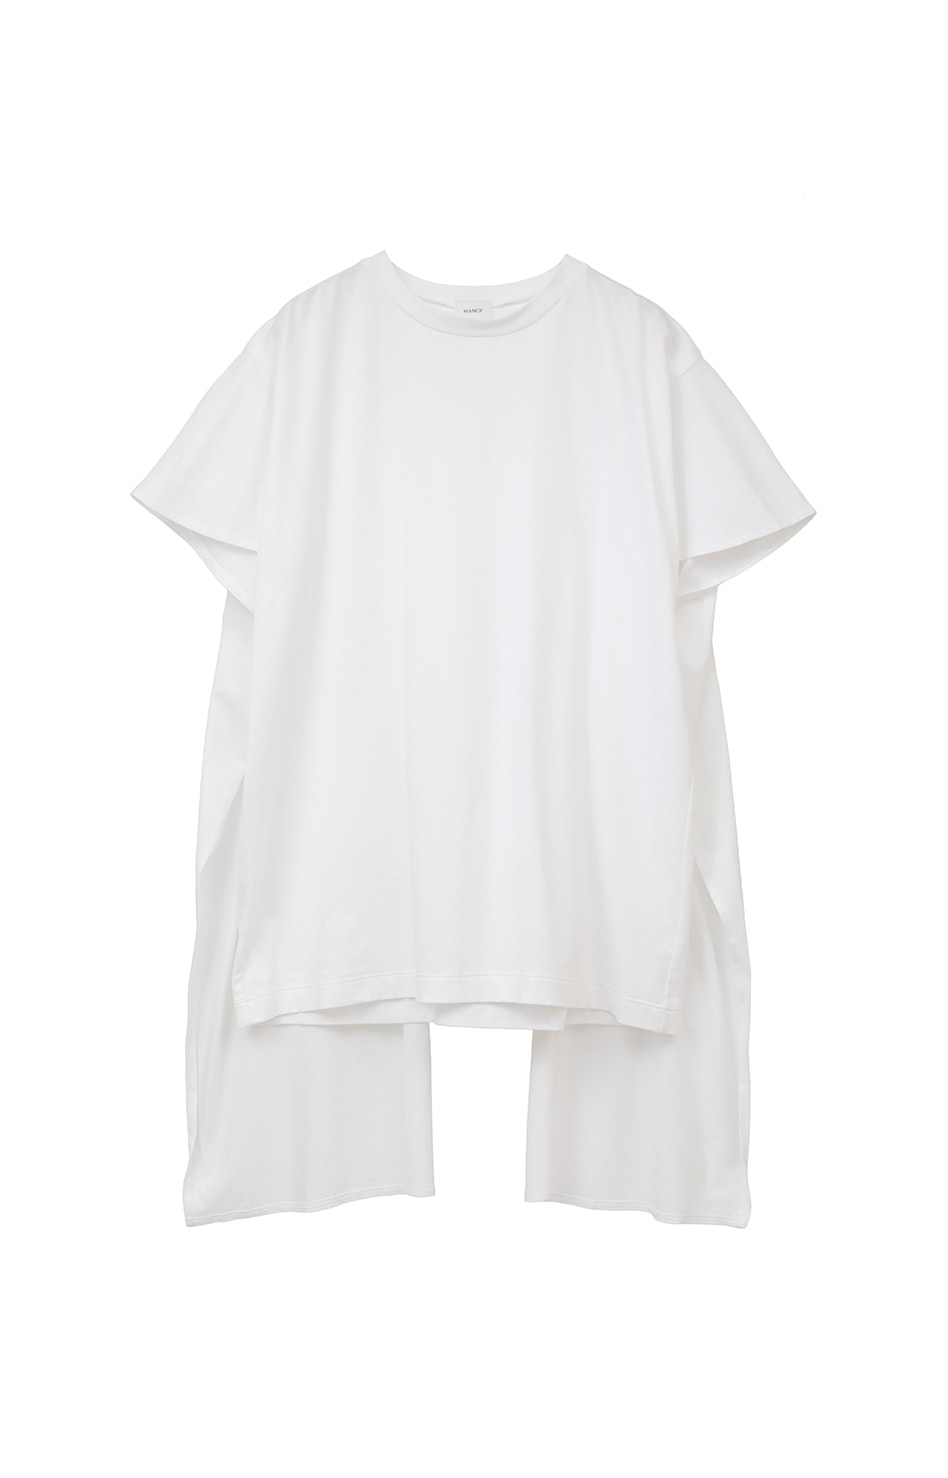 BACK LAYERED CUT TOPS｜TOPS(トップス)｜CLANE OFFICIAL ONLINE STORE